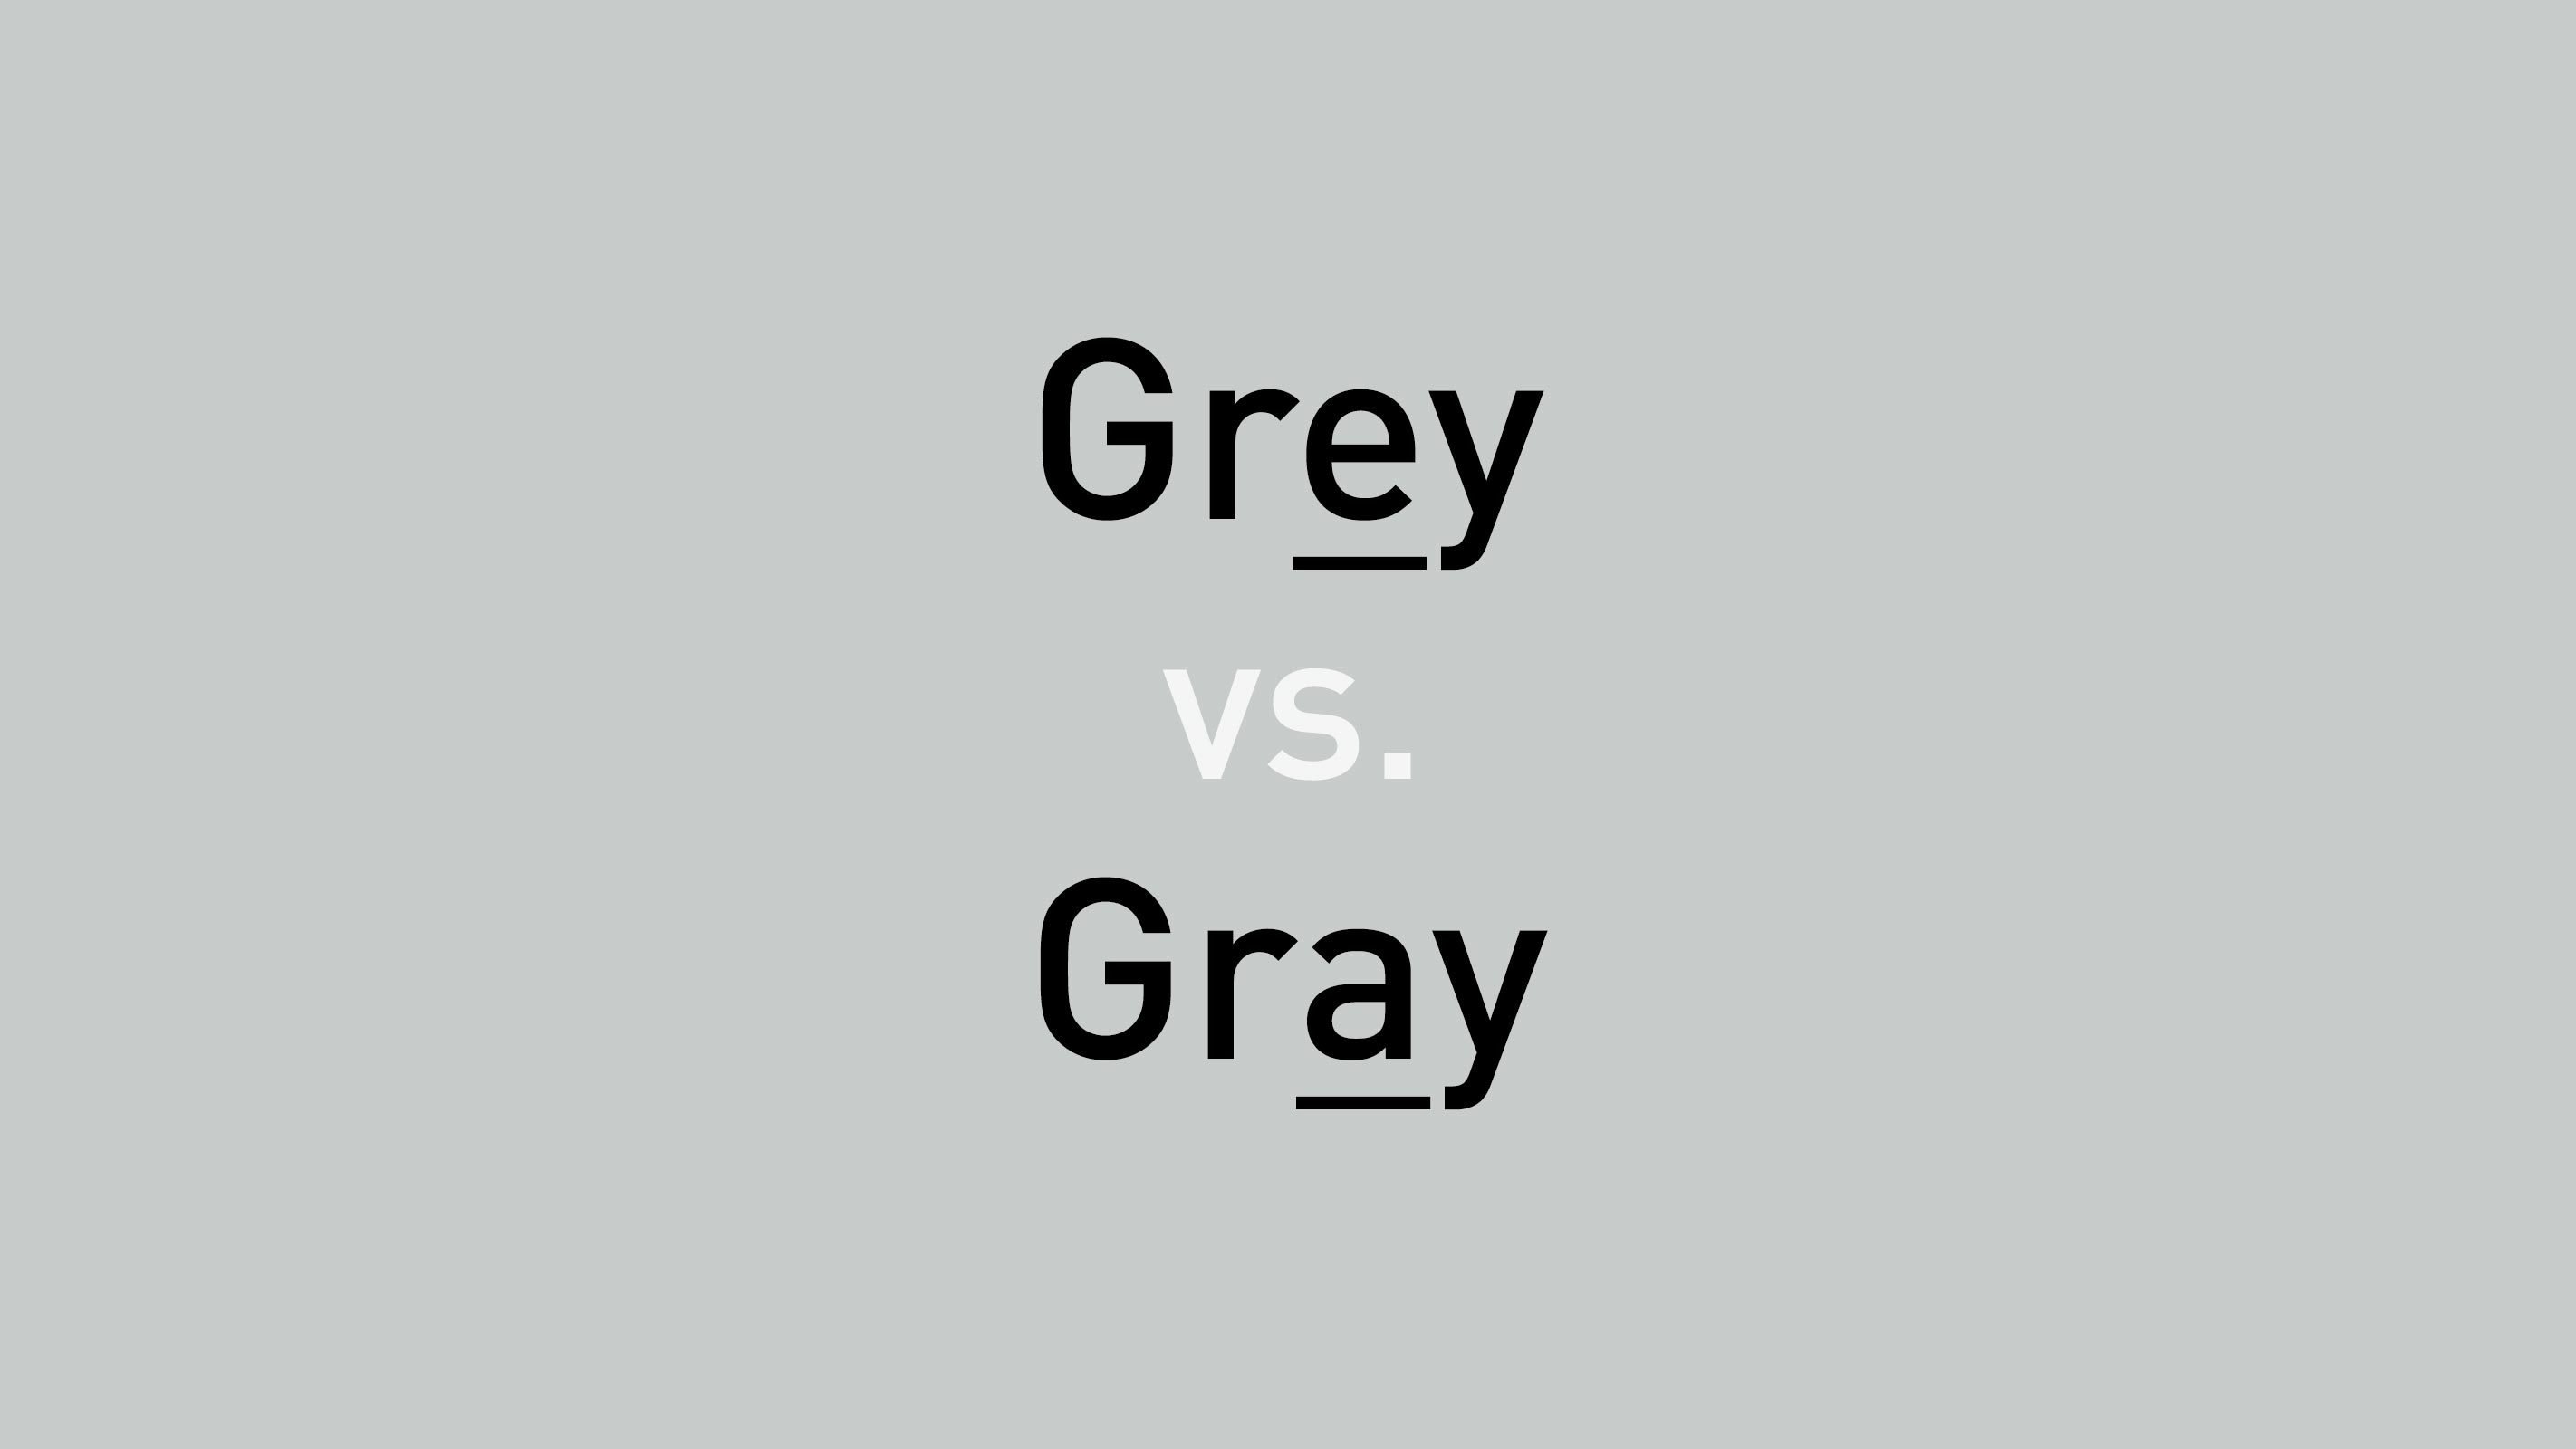 Is it spelled grey or gray?